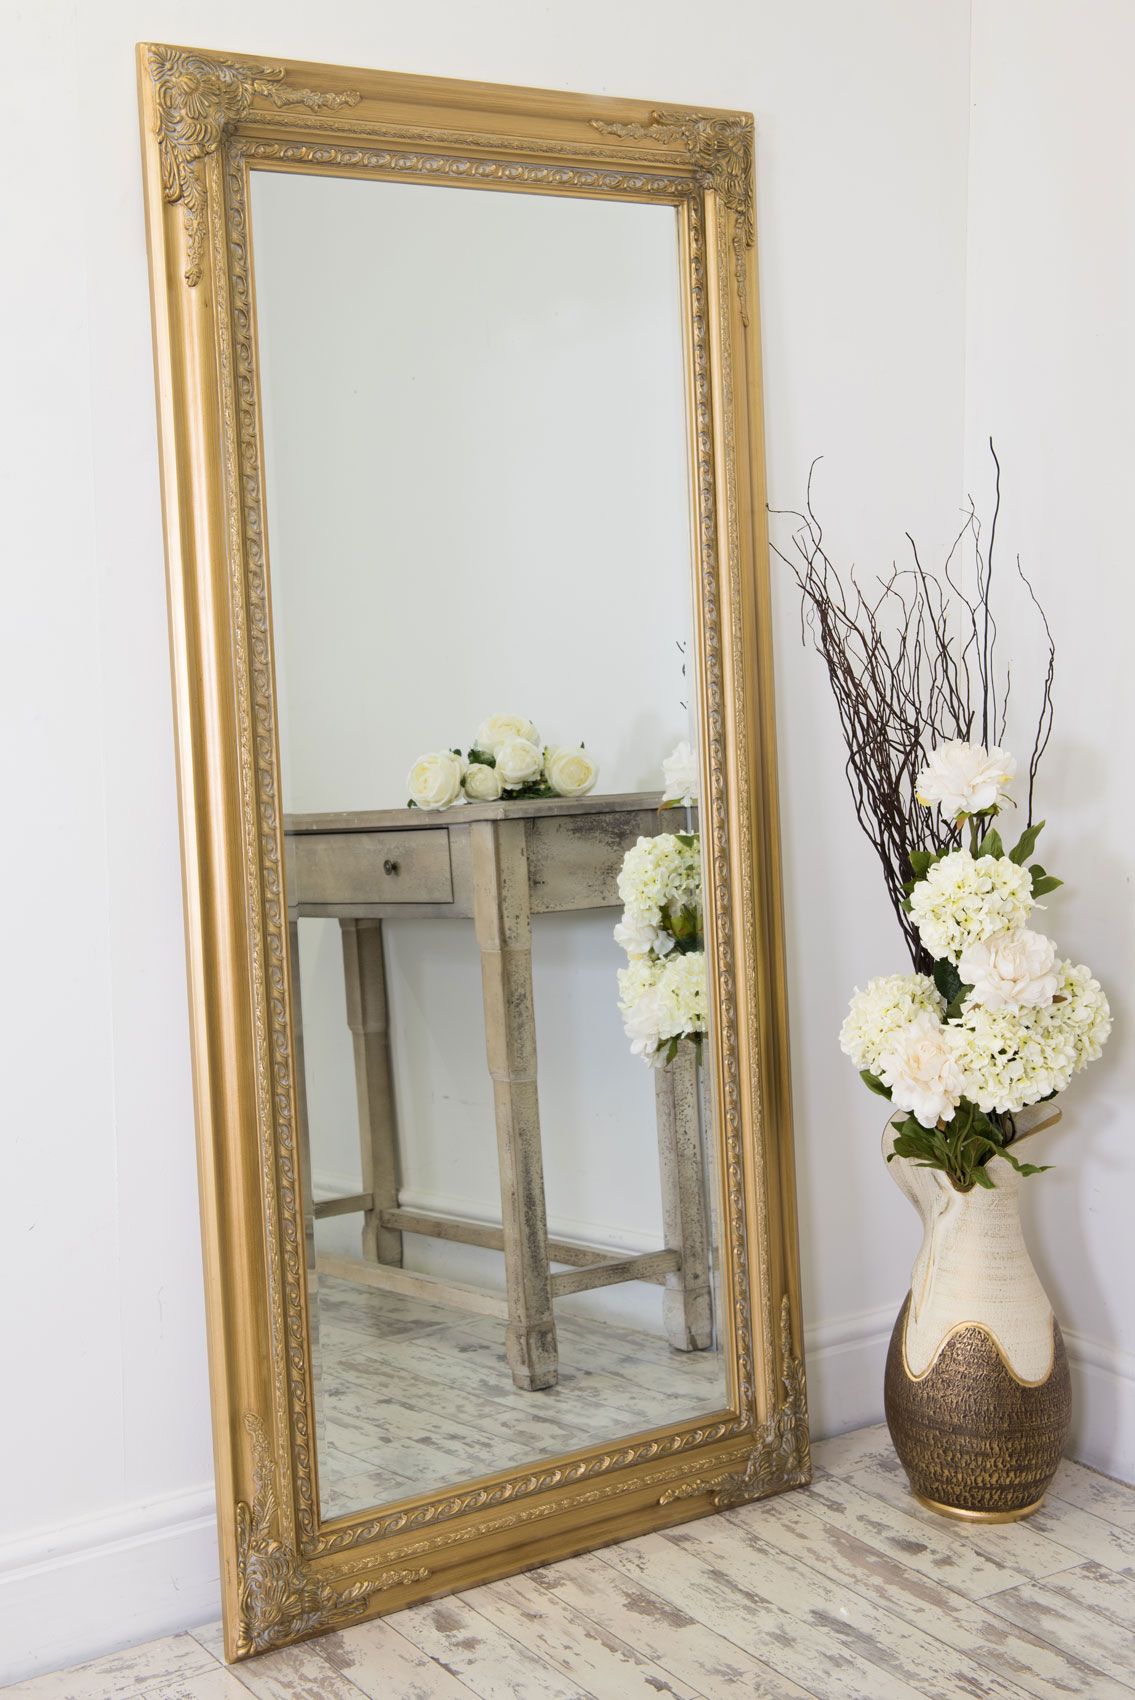 Extra Large Gold Antique Style Wall Mirror Wood 5ft10 X 2ft10 178cm X Throughout Oversized Wall Mirrors (View 5 of 15)